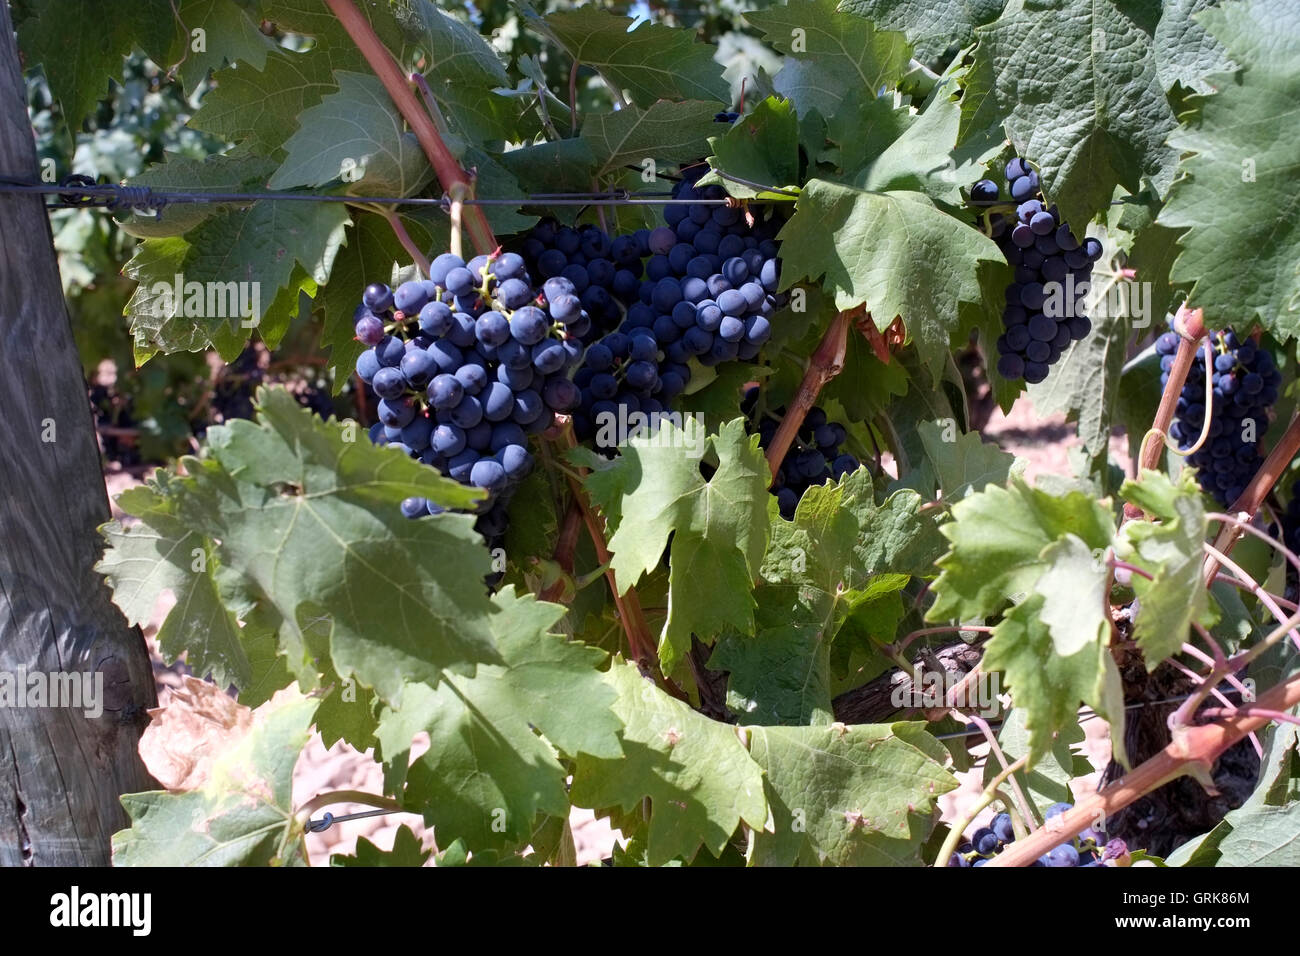 Tempranillo grapes are seen on the vine in a vineyard in Briones, Spain August 26, 2016. Copyright photograph John Voos Stock Photo